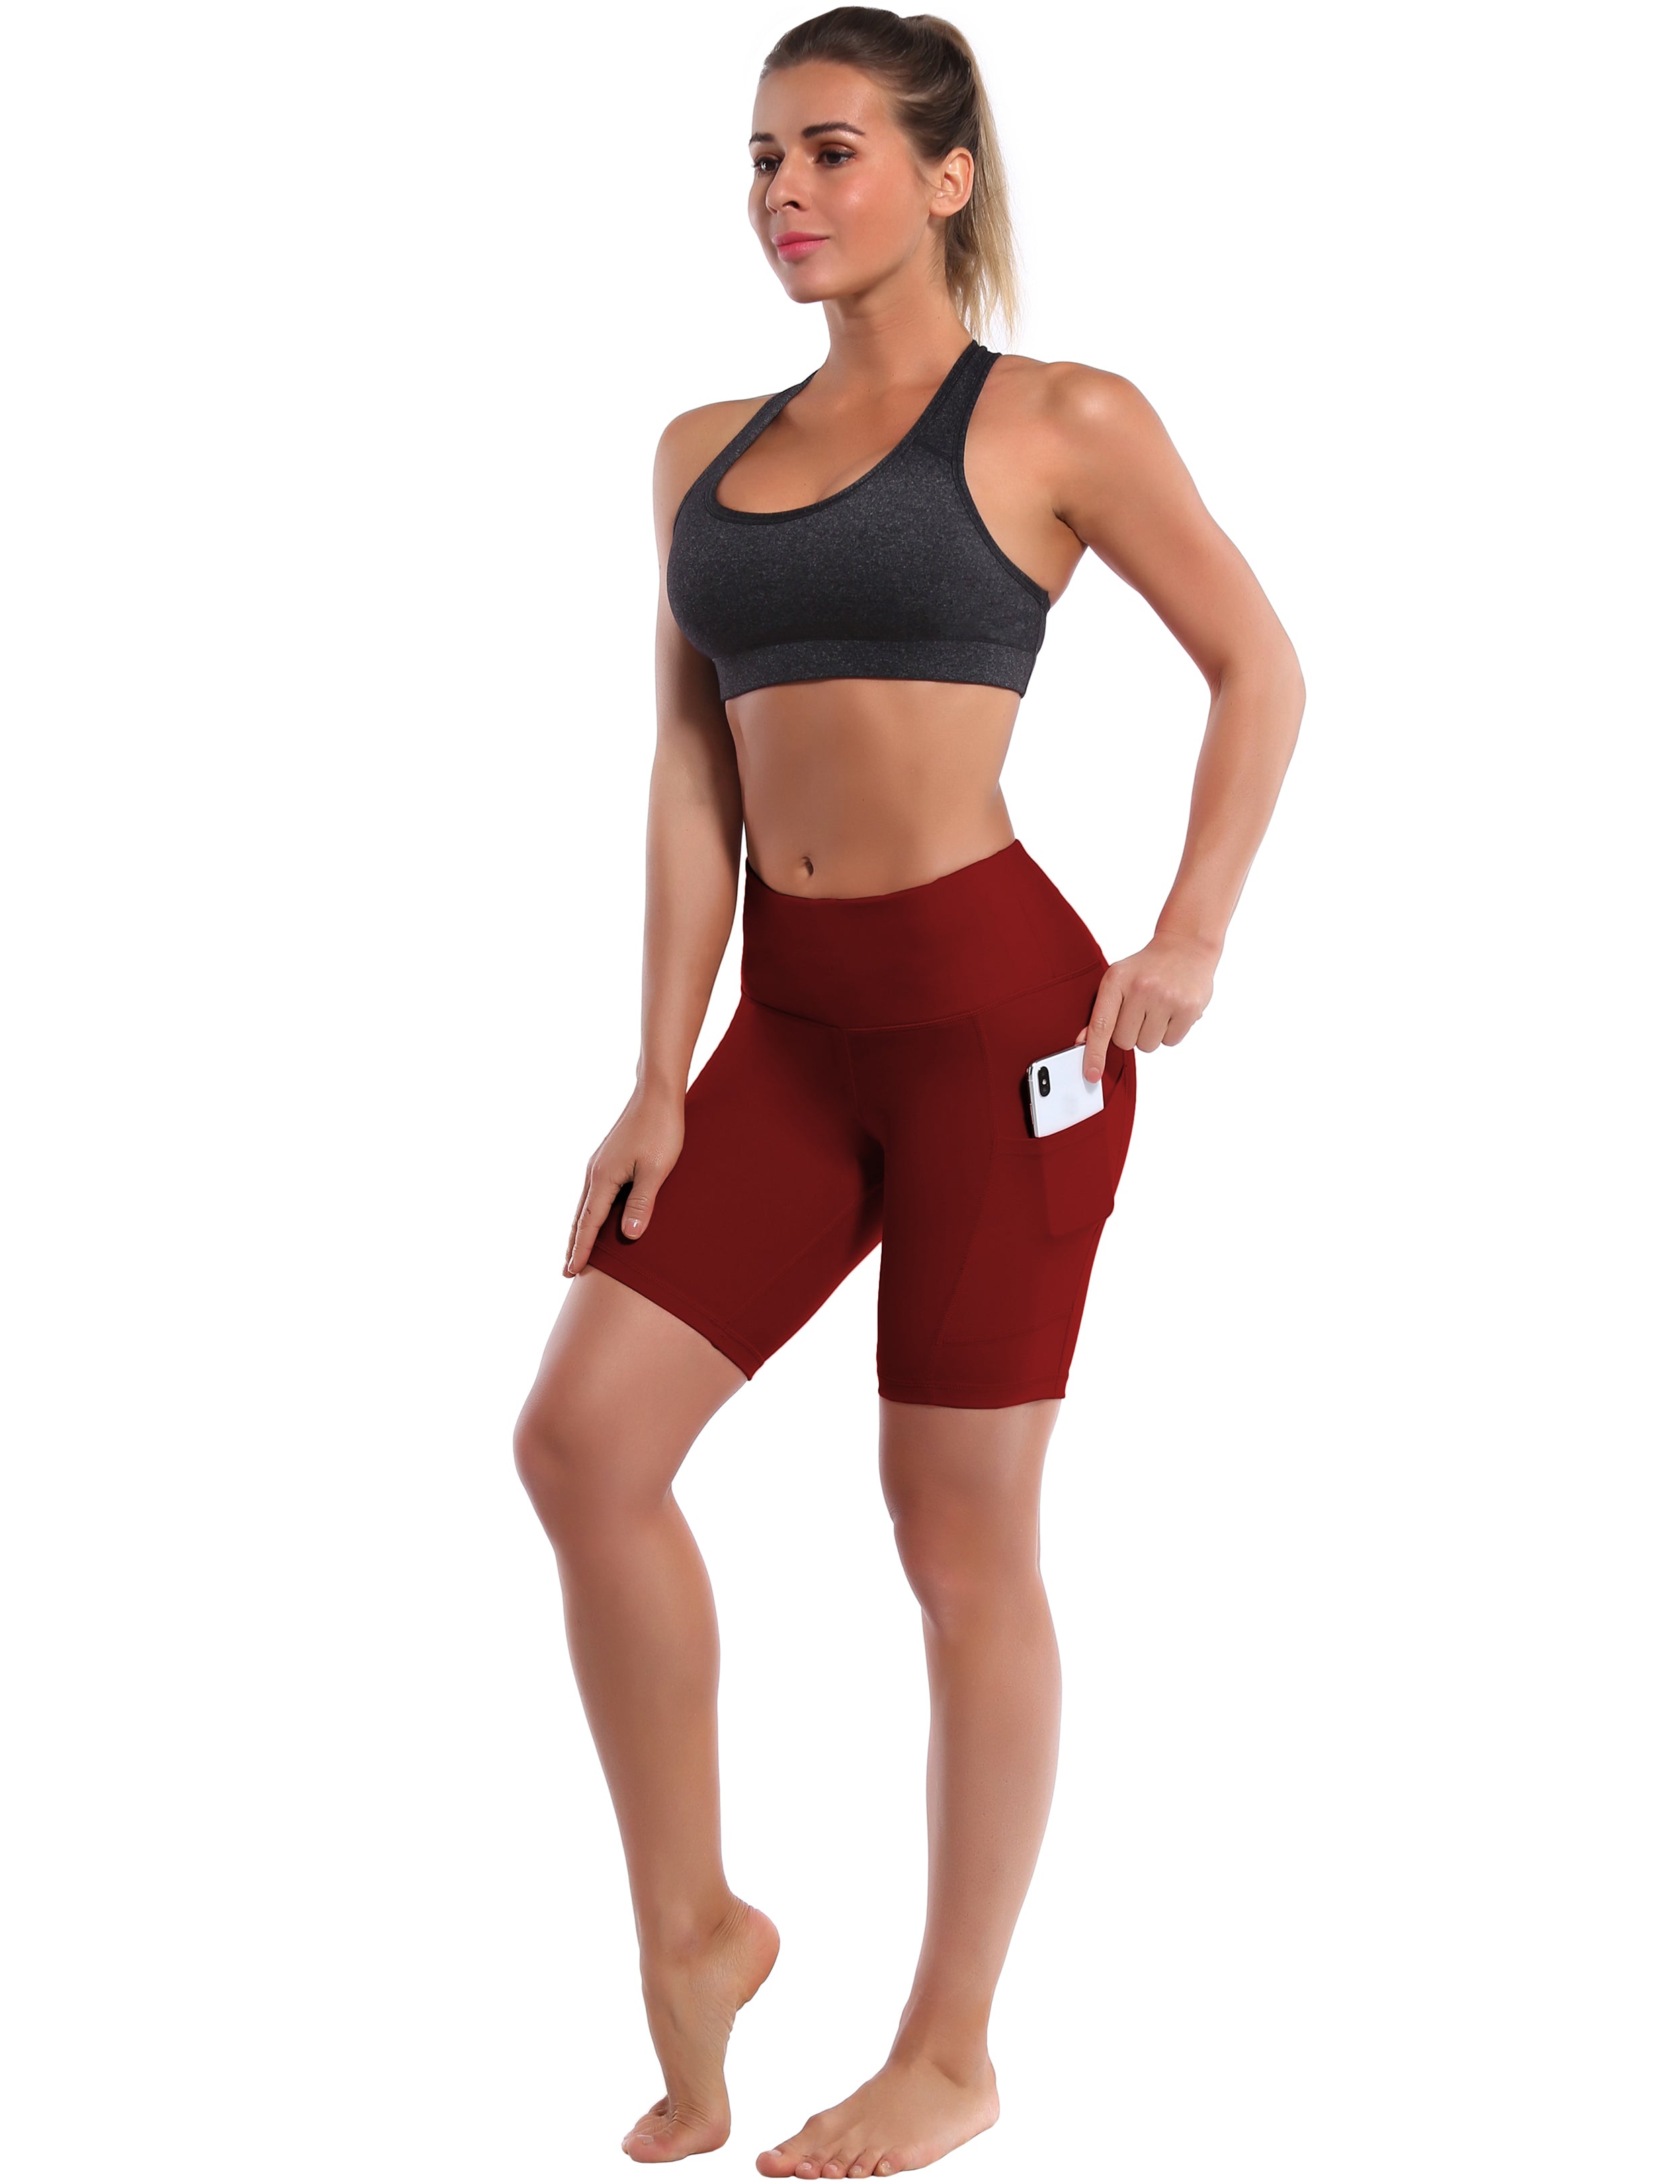 8" Side Pockets Yoga Shorts cherryred Sleek, soft, smooth and totally comfortable: our newest style is here. Softest-ever fabric High elasticity High density 4-way stretch Fabric doesn't attract lint easily No see-through Moisture-wicking Machine wash 75% Nylon, 25% Spandex